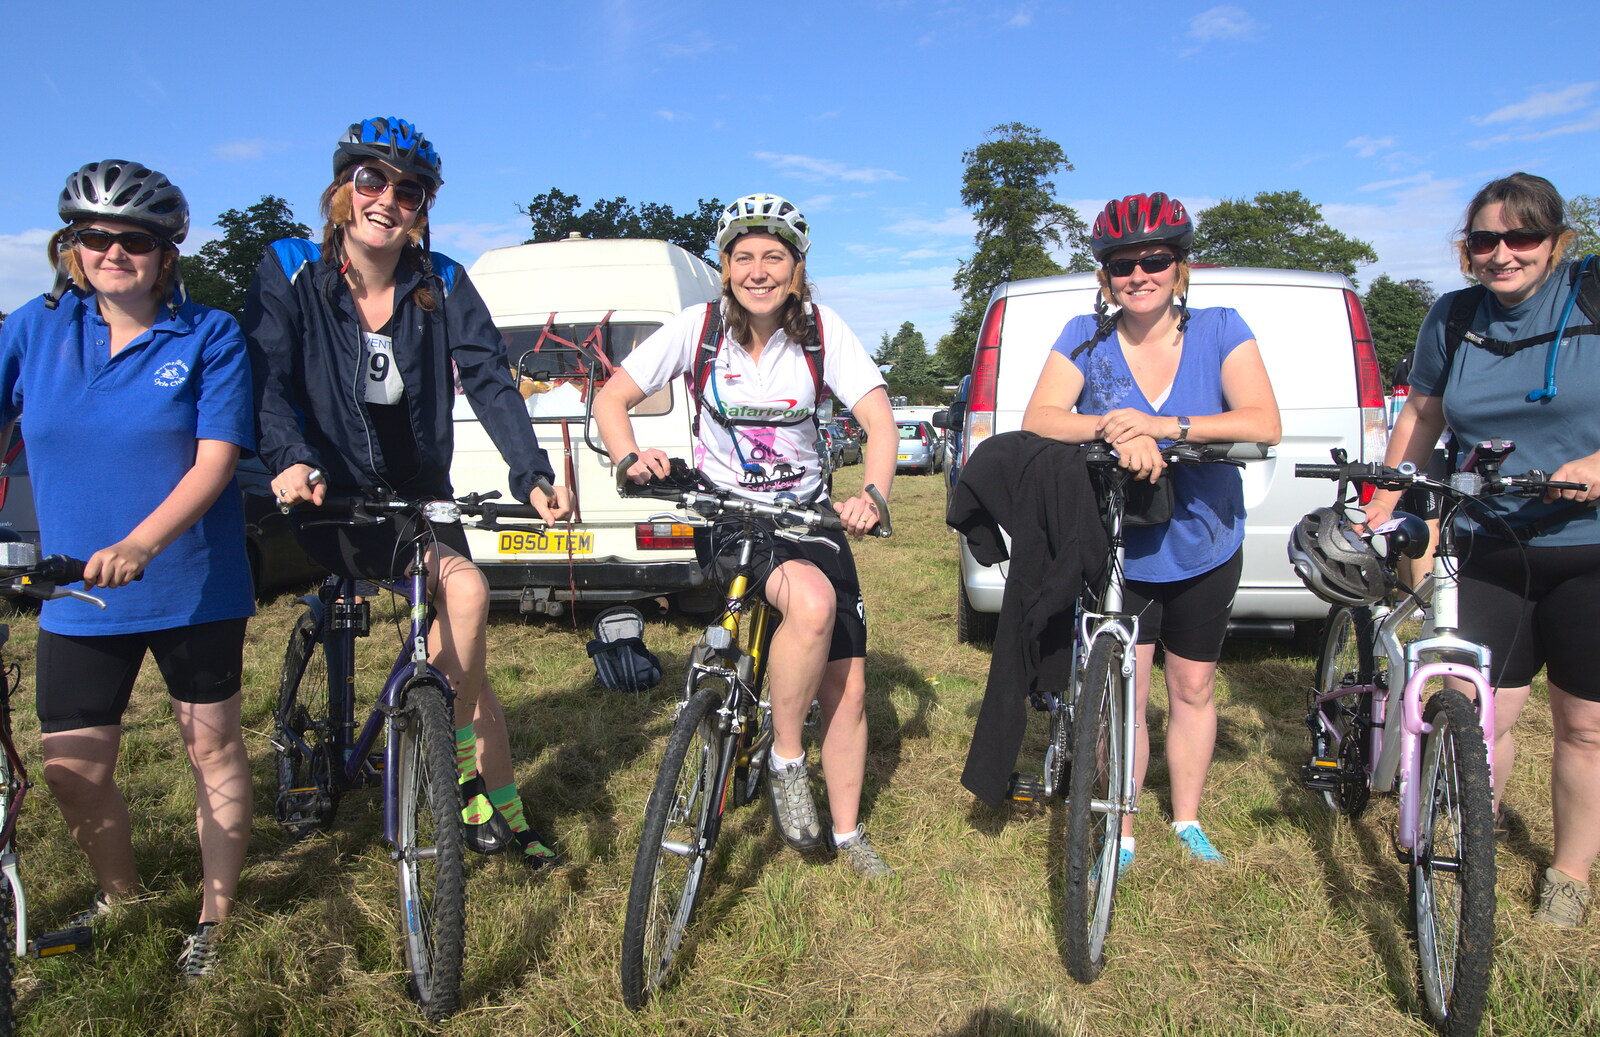 Isobel in a group photo before the Off from The RSPB Charity Bike Ride, Little Glemham, Suffolk - 5th August 2012